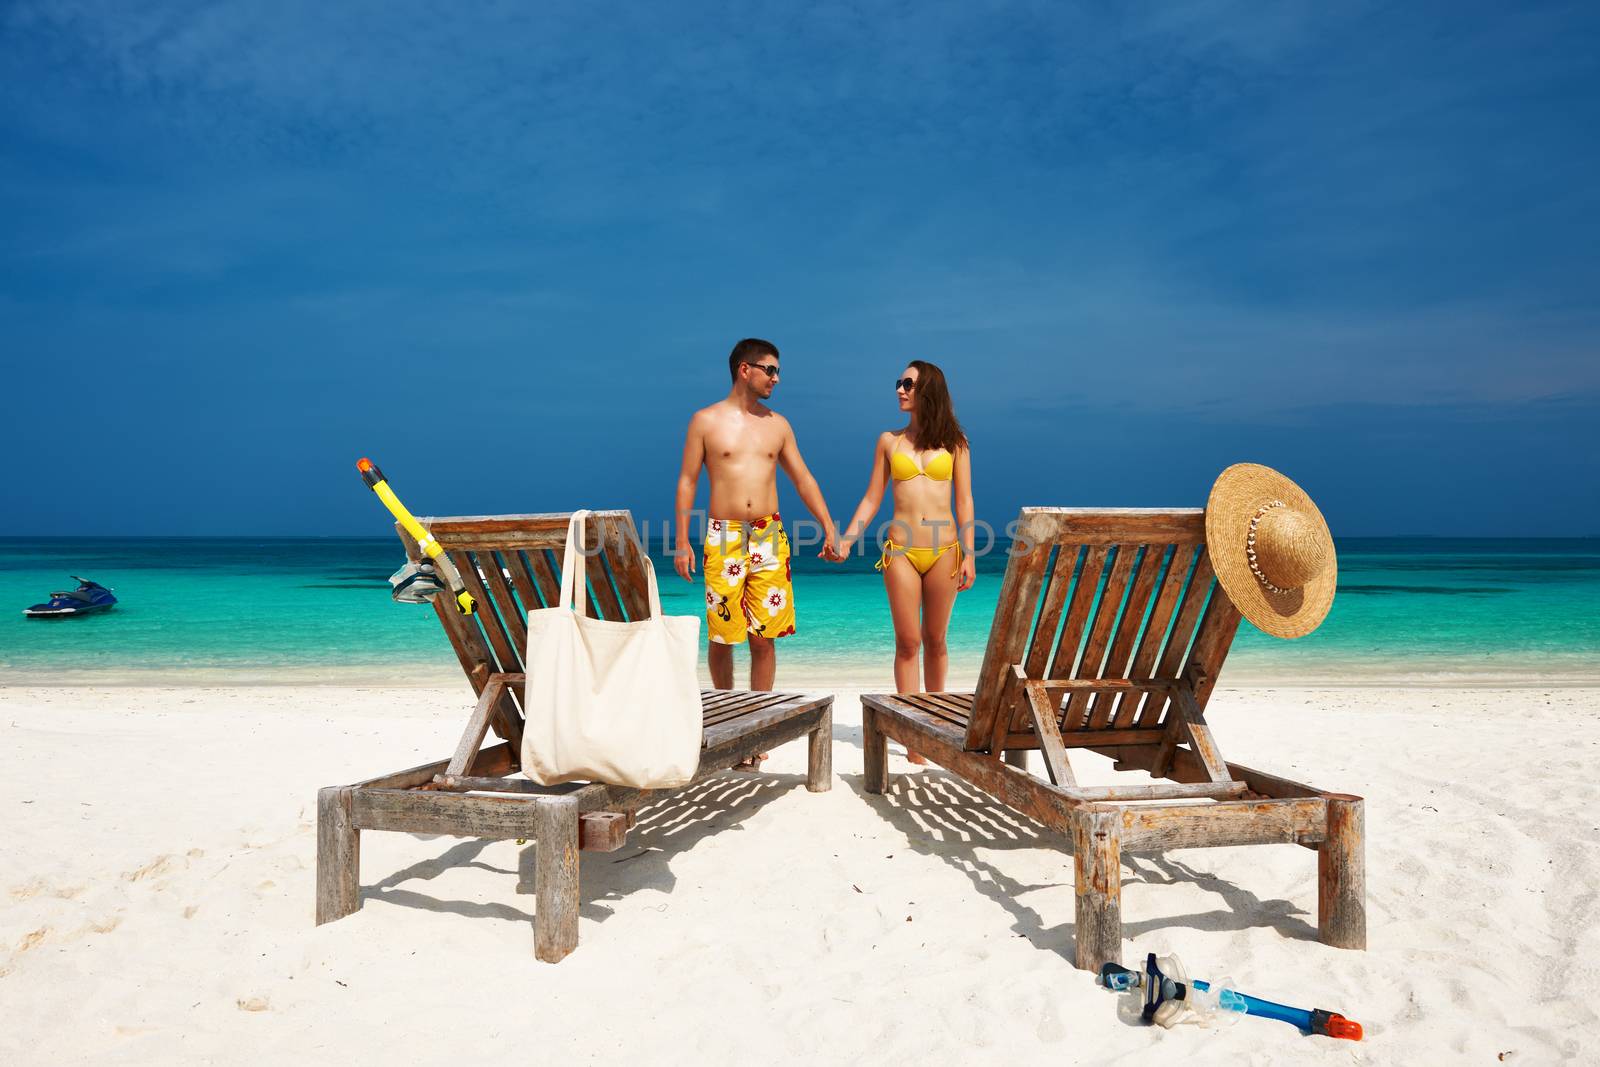 Couple in yellow on a beach at Maldives by haveseen